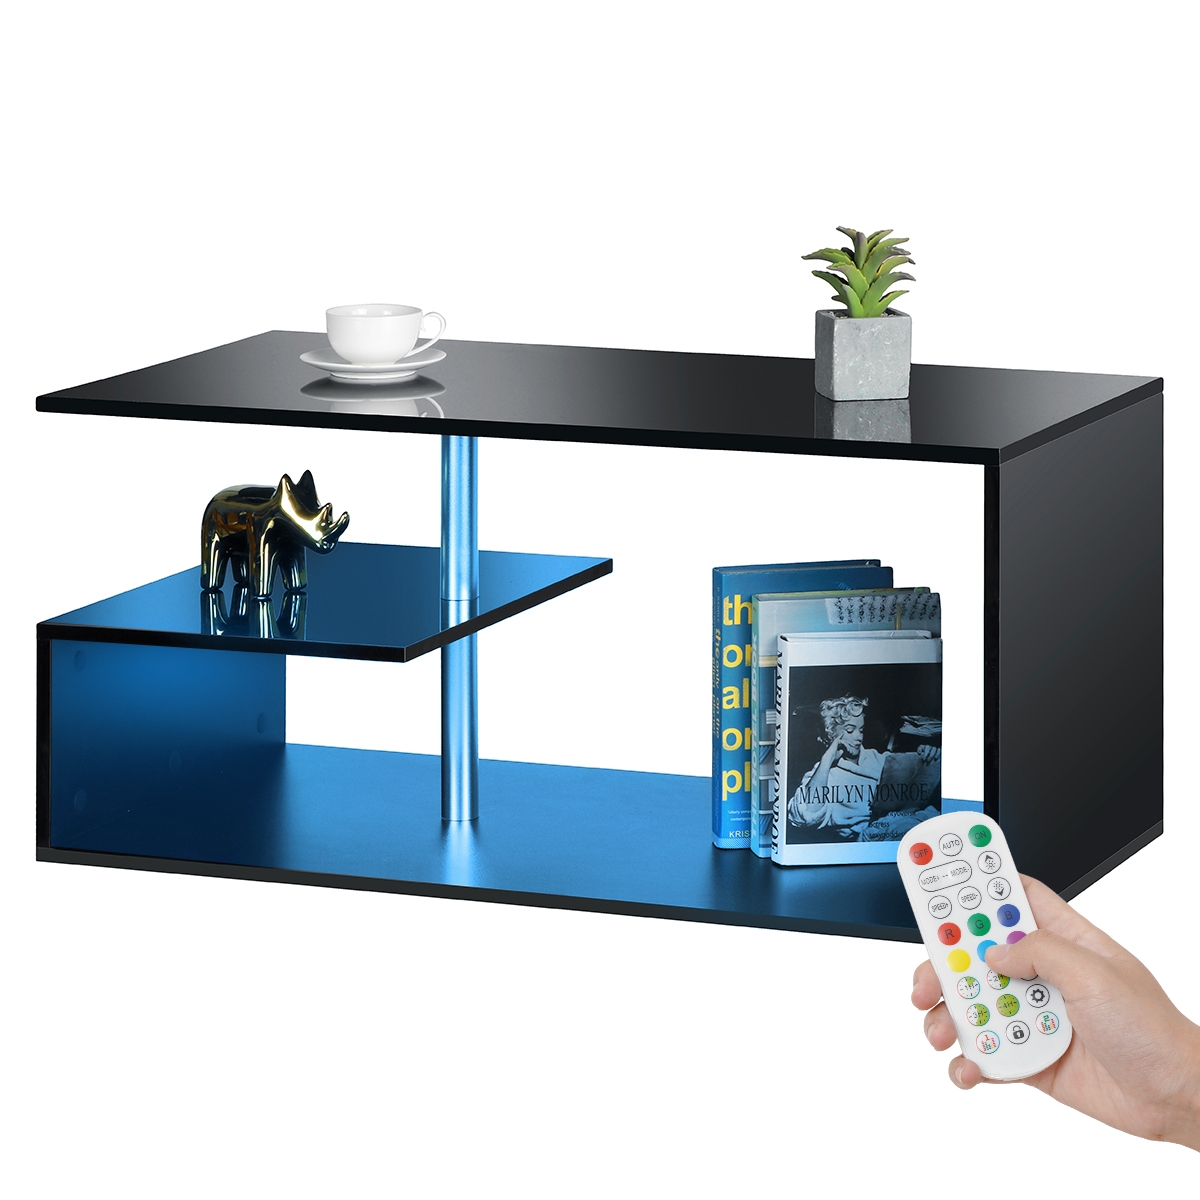 Hommpa High Gloss Coffee Table with Open Shelf LED Lights Smart APP Control Black Center Sofa End Table S Shaped Modern Cocktail Tables with for Living Room - image 3 of 12